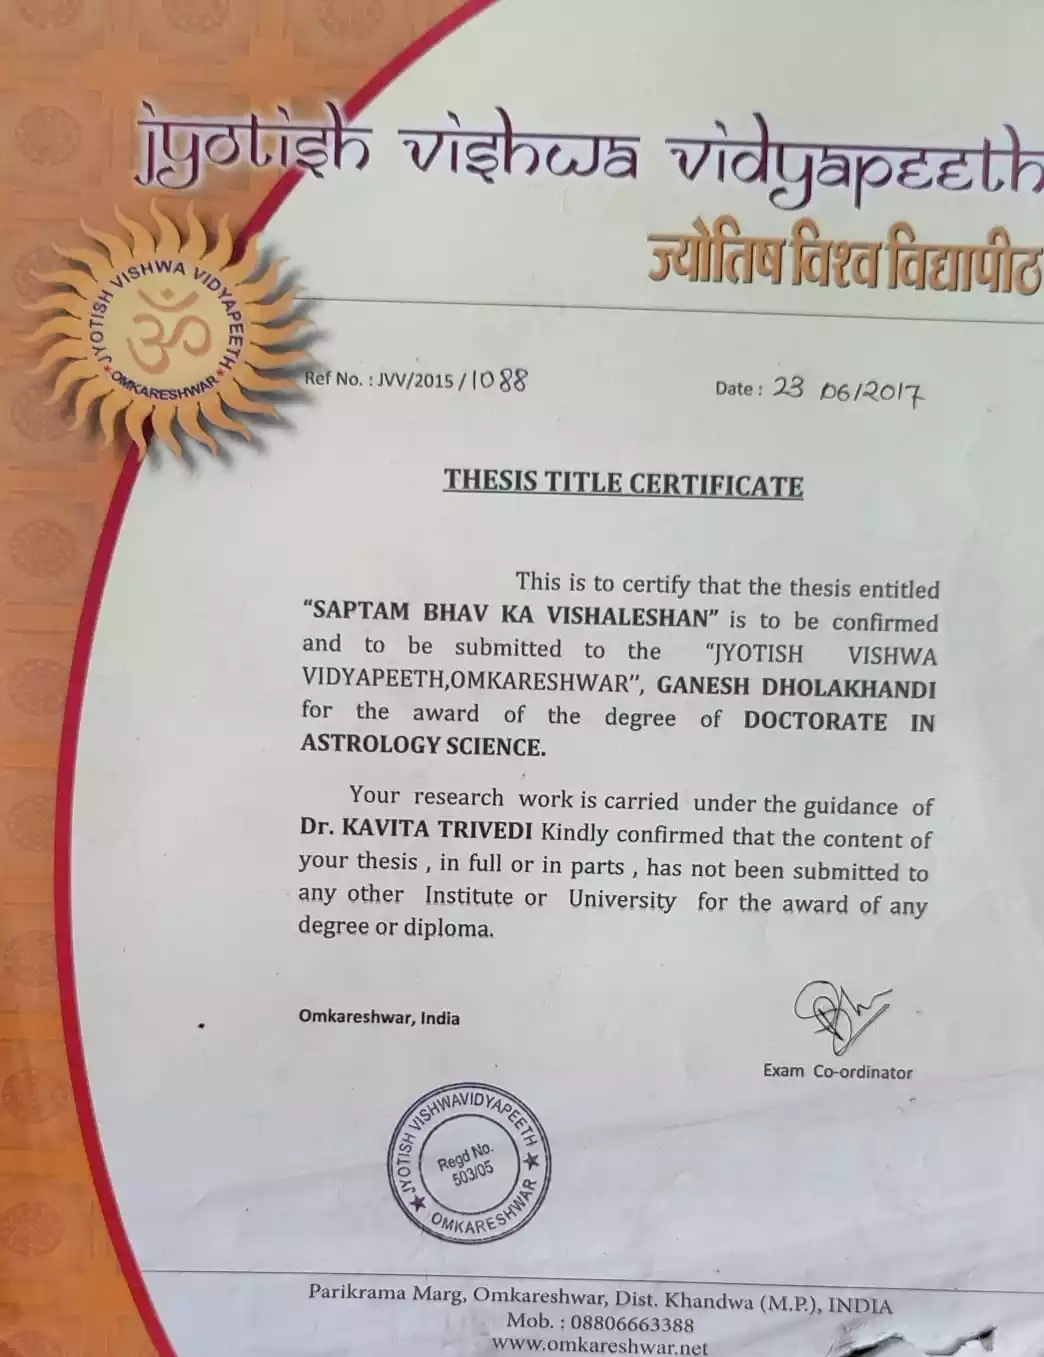  Certificate of Thesis